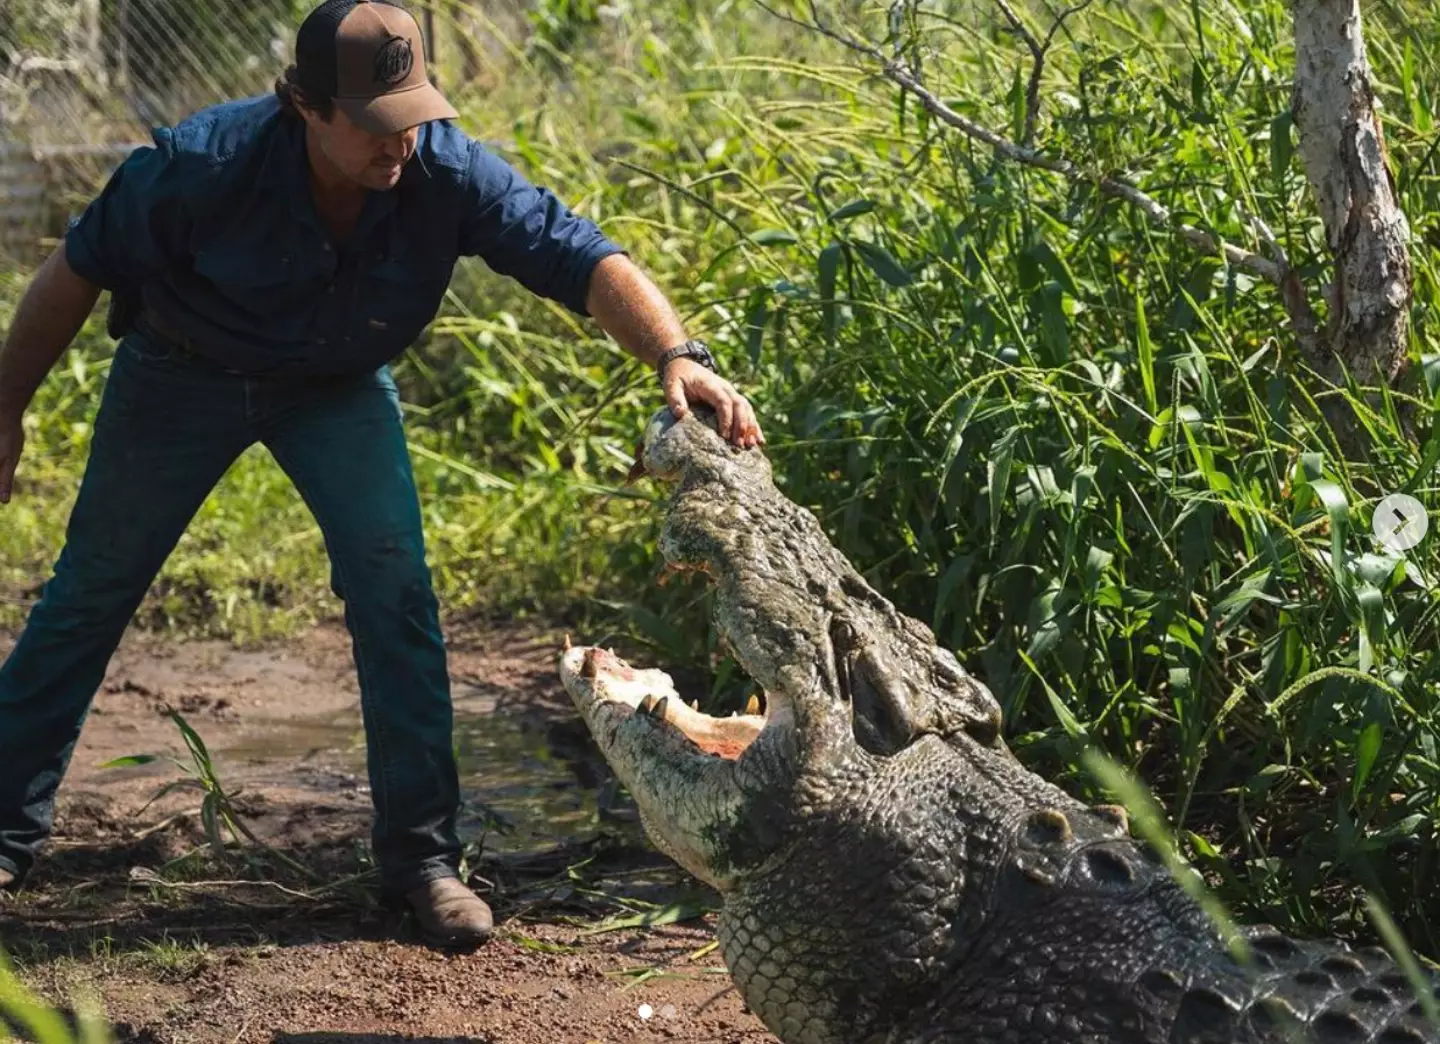 Matt Wright has been dubbed as the 'new Steve Irwin' after his new series dropped on Netflix.